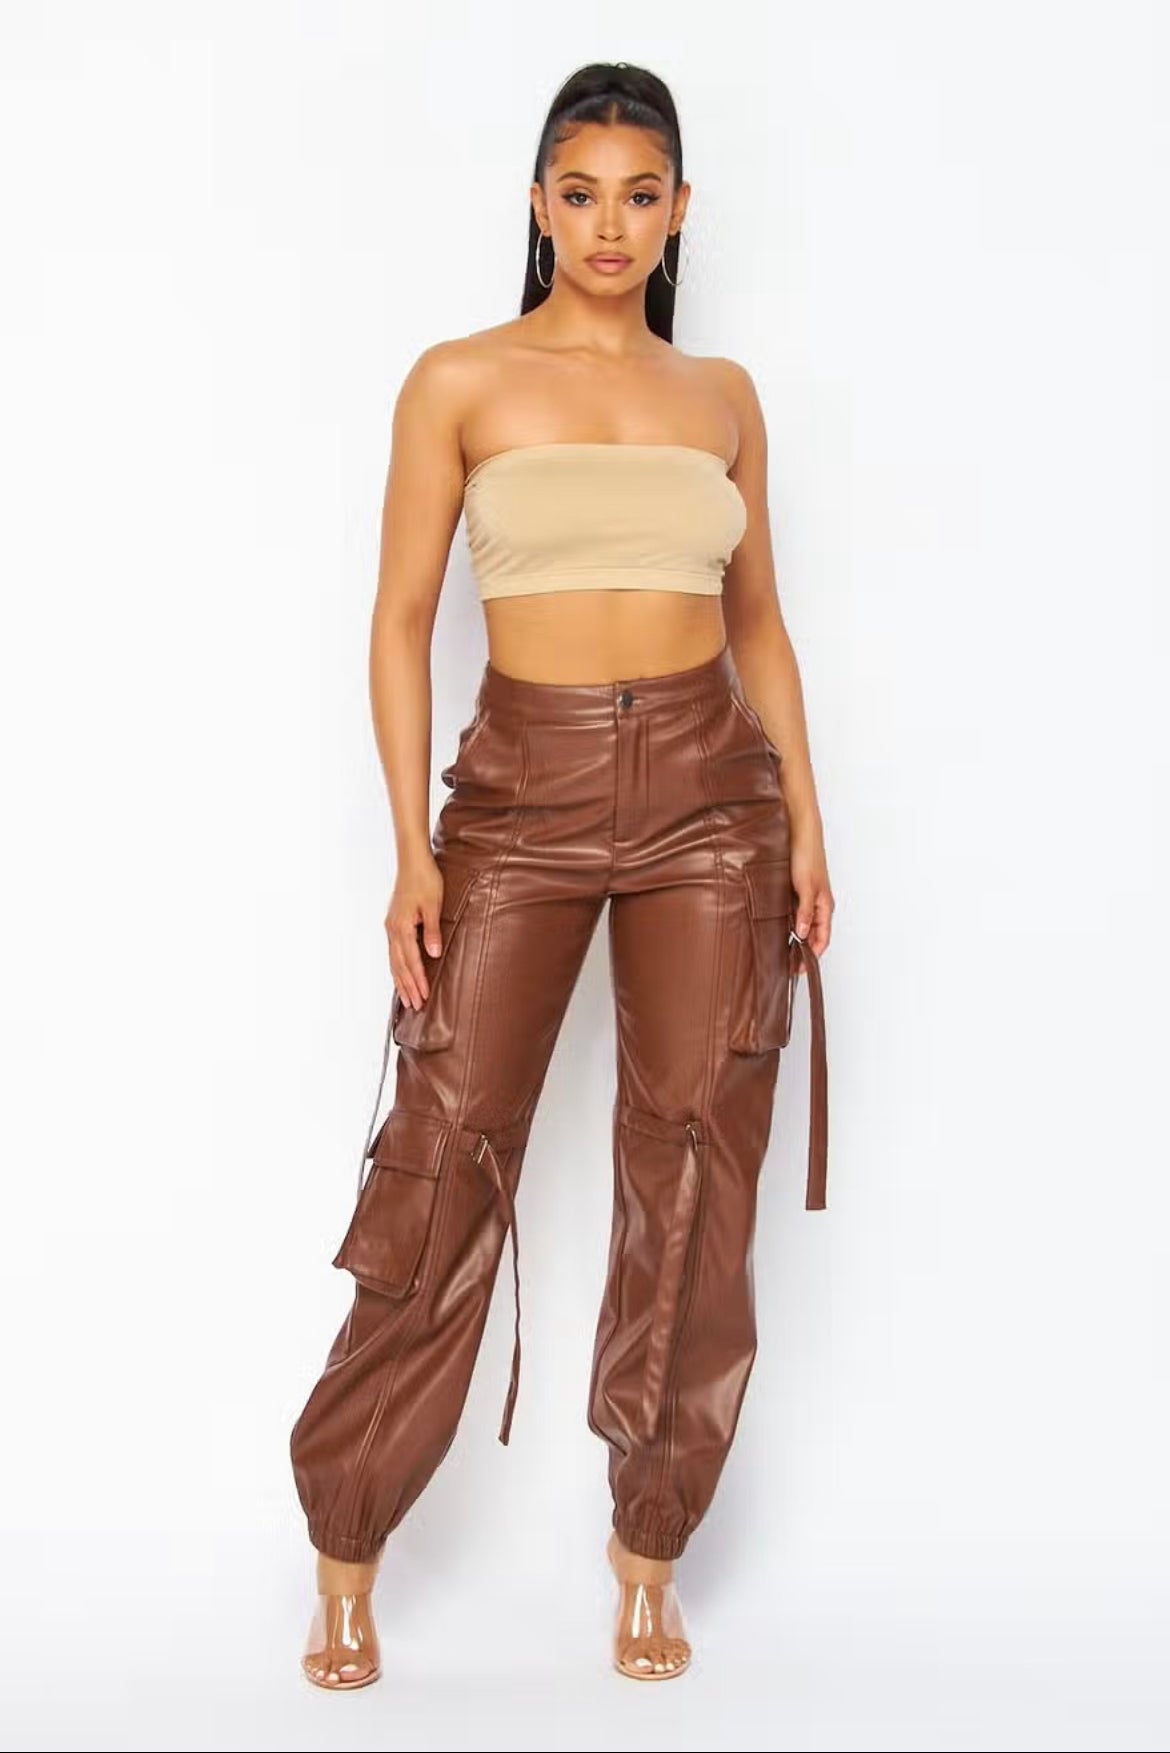 Leather joggers